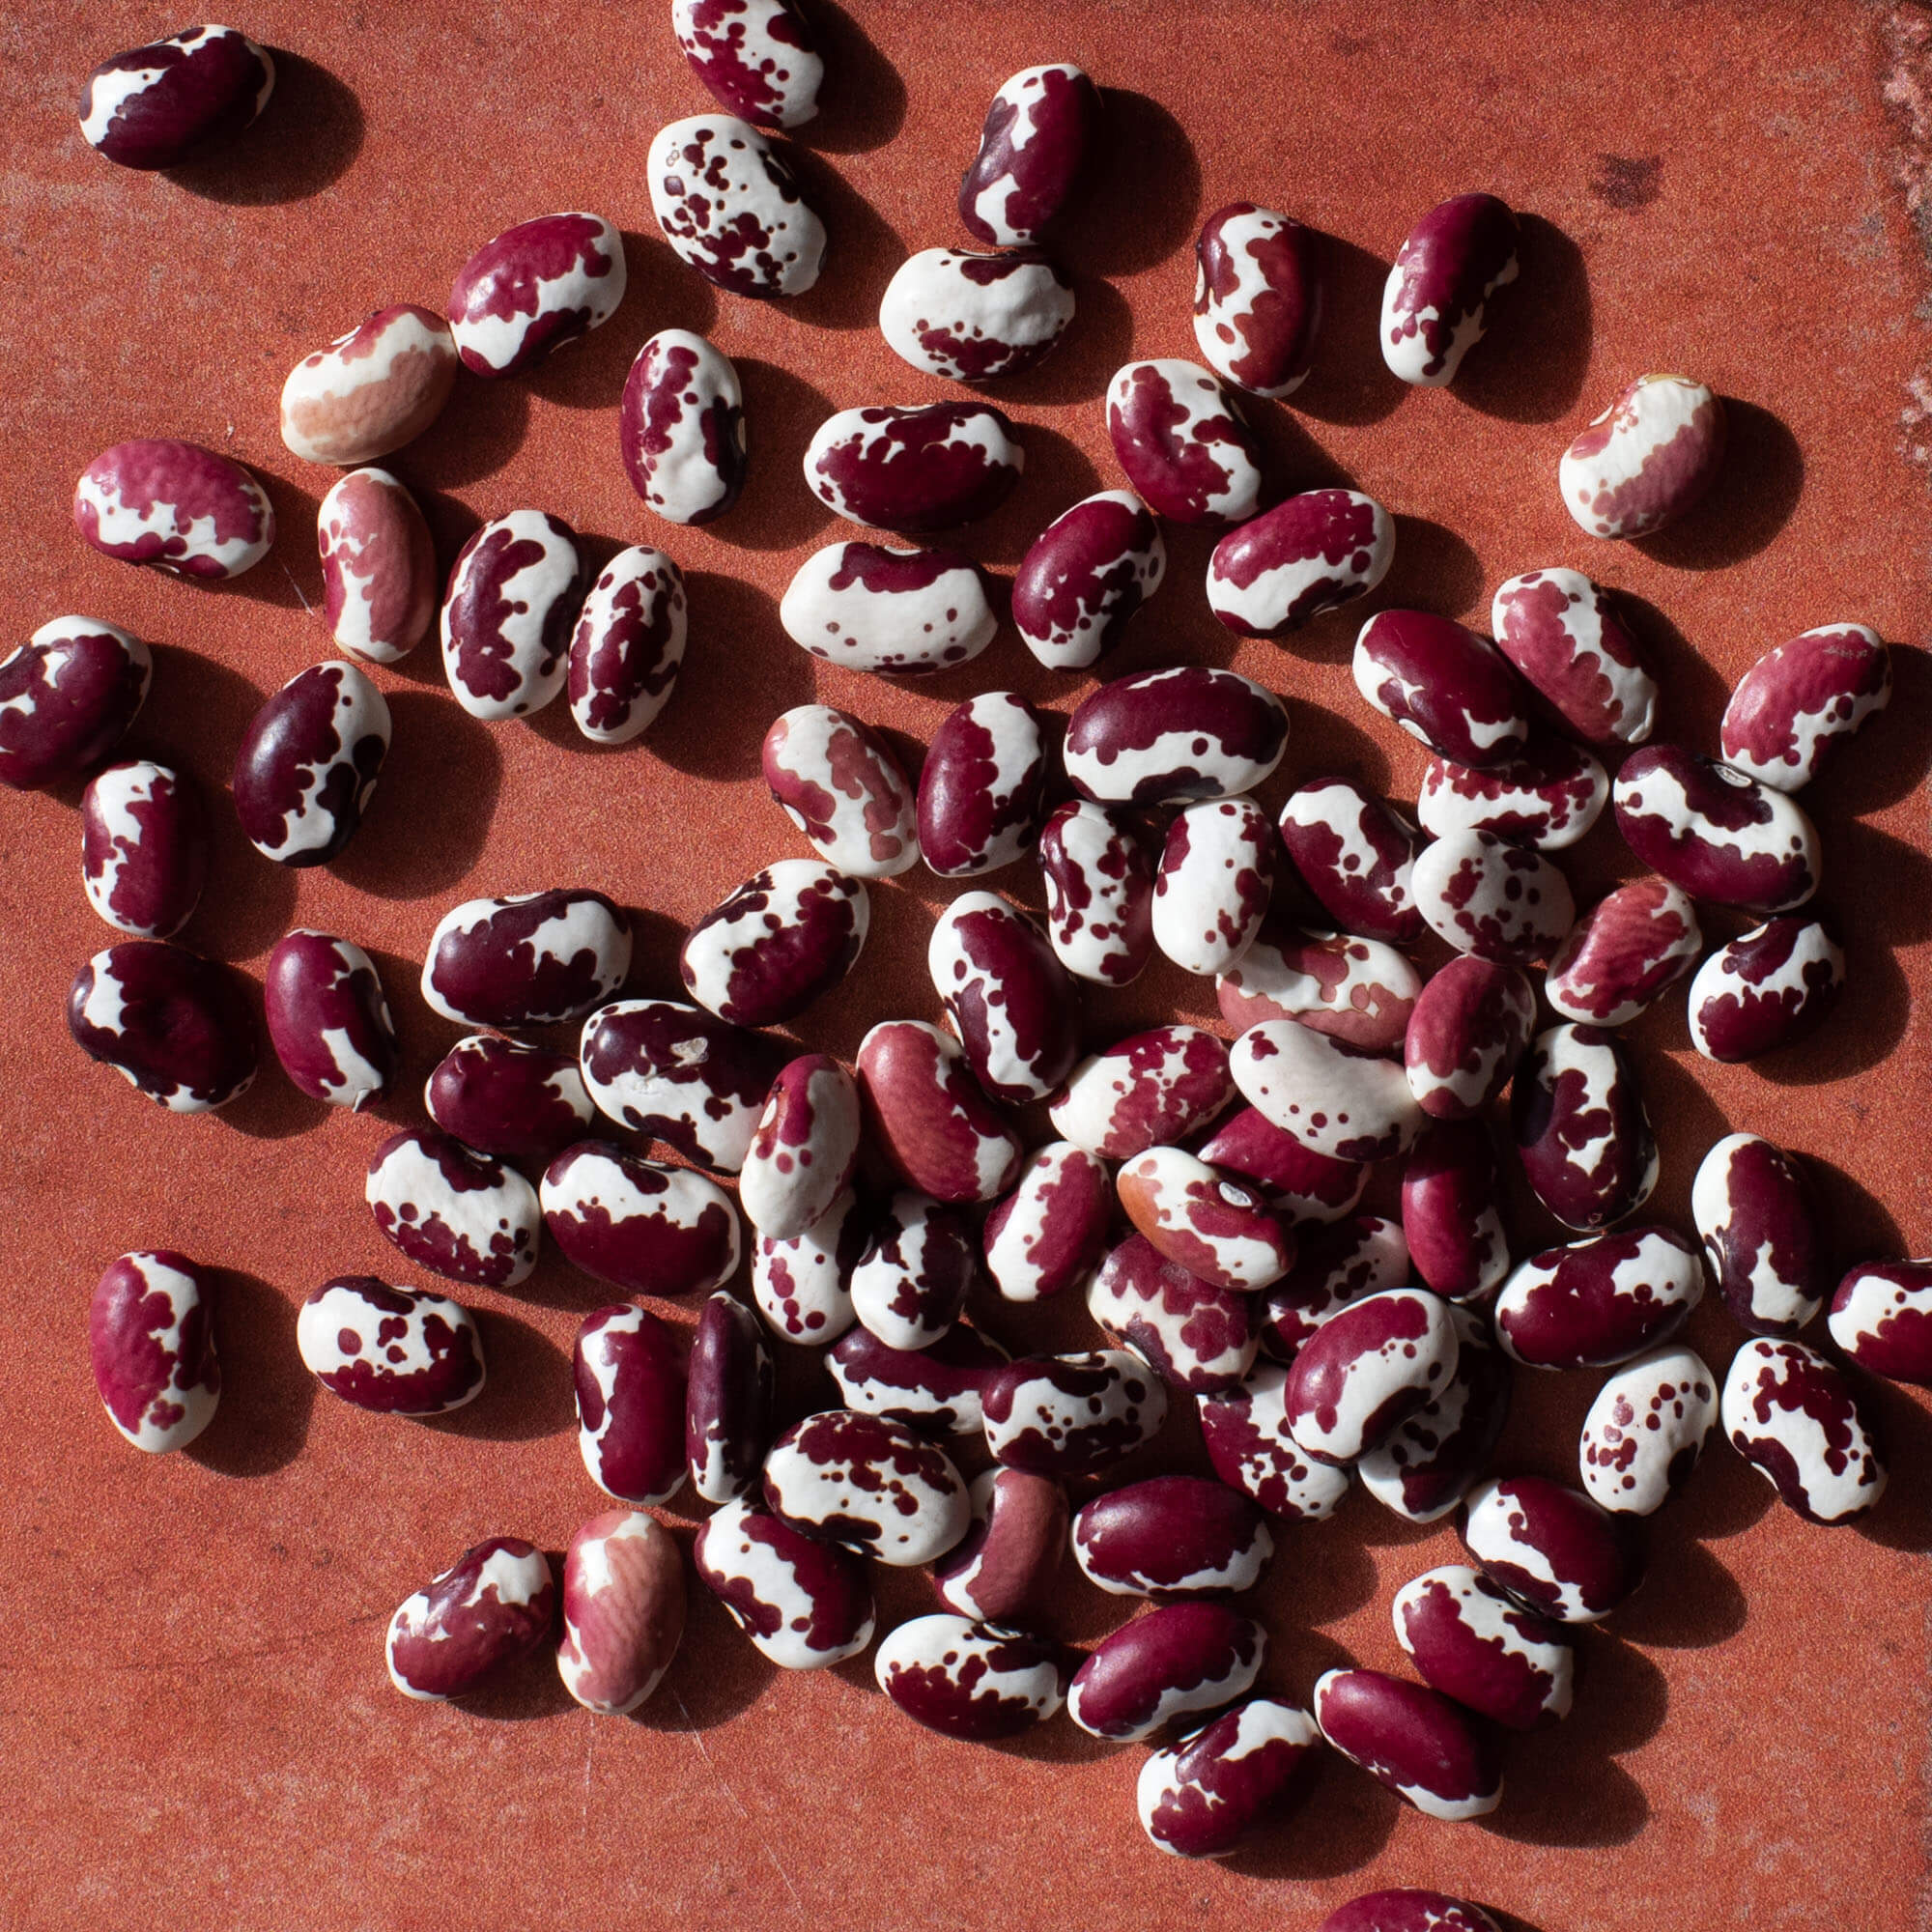 Primary Beans Organic Southwest Red beans